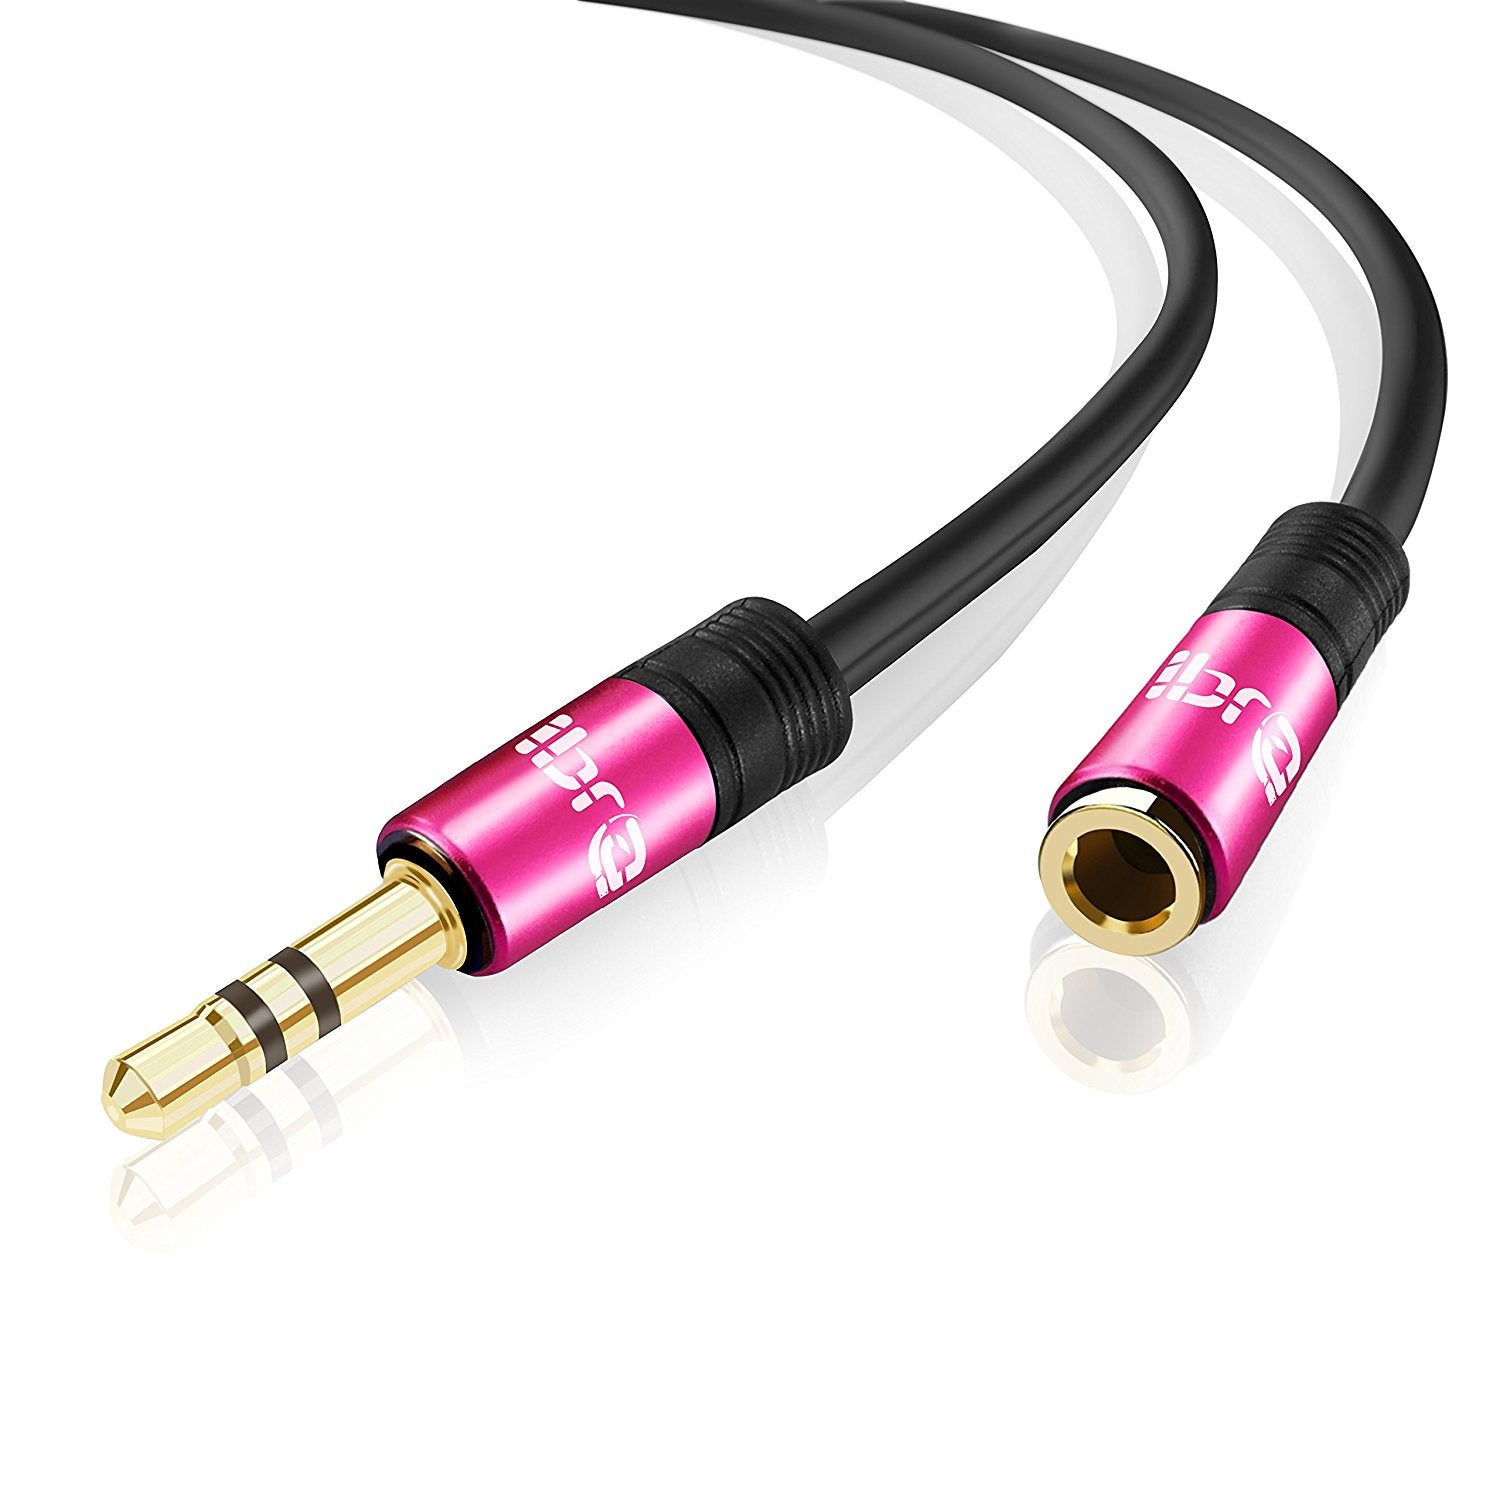 IBRA 3M Stereo Jack Extension Cable 3.5mm Male > 3.5mm Female - Pink